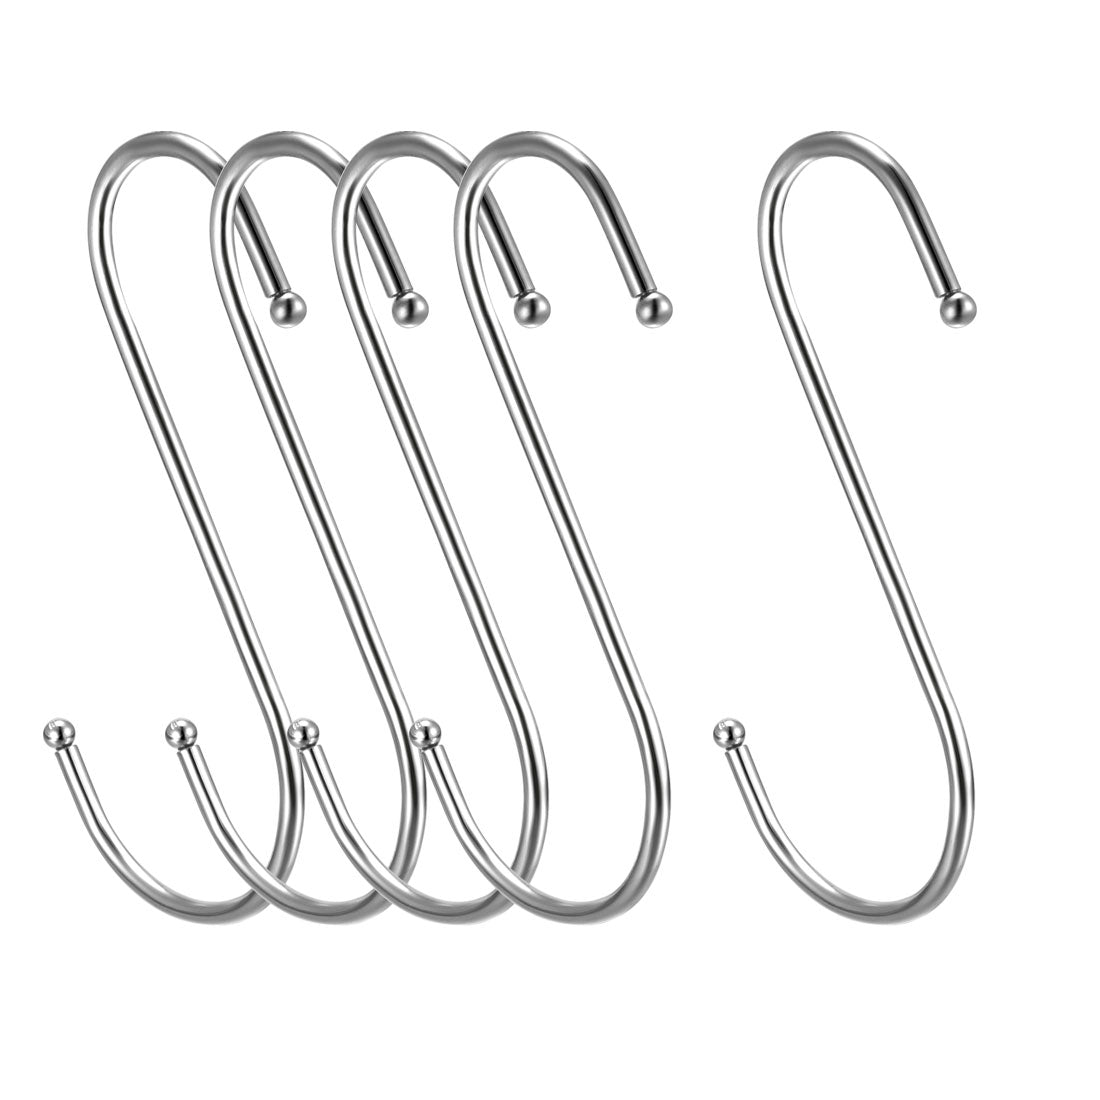 uxcell Uxcell Metal S Hooks 4.53" S Shaped Hook Hangers 5pcs